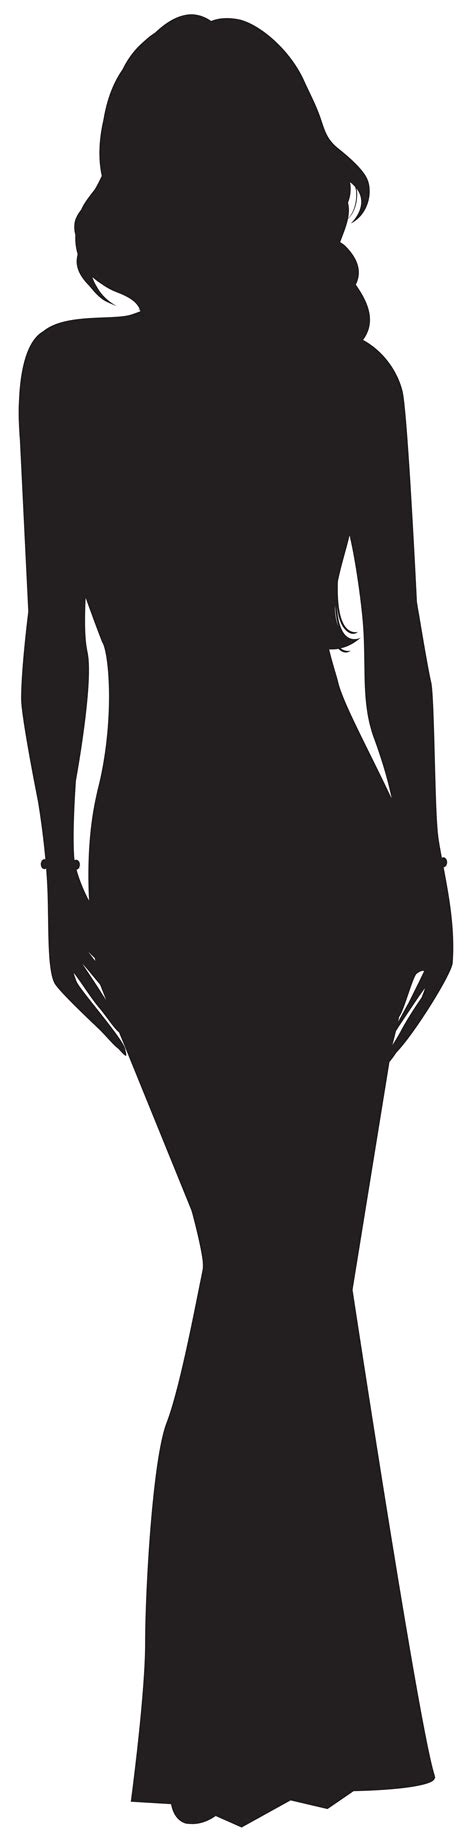 Download Woman Silhouette Female Free Clipart Hq Clipart Png Free C D